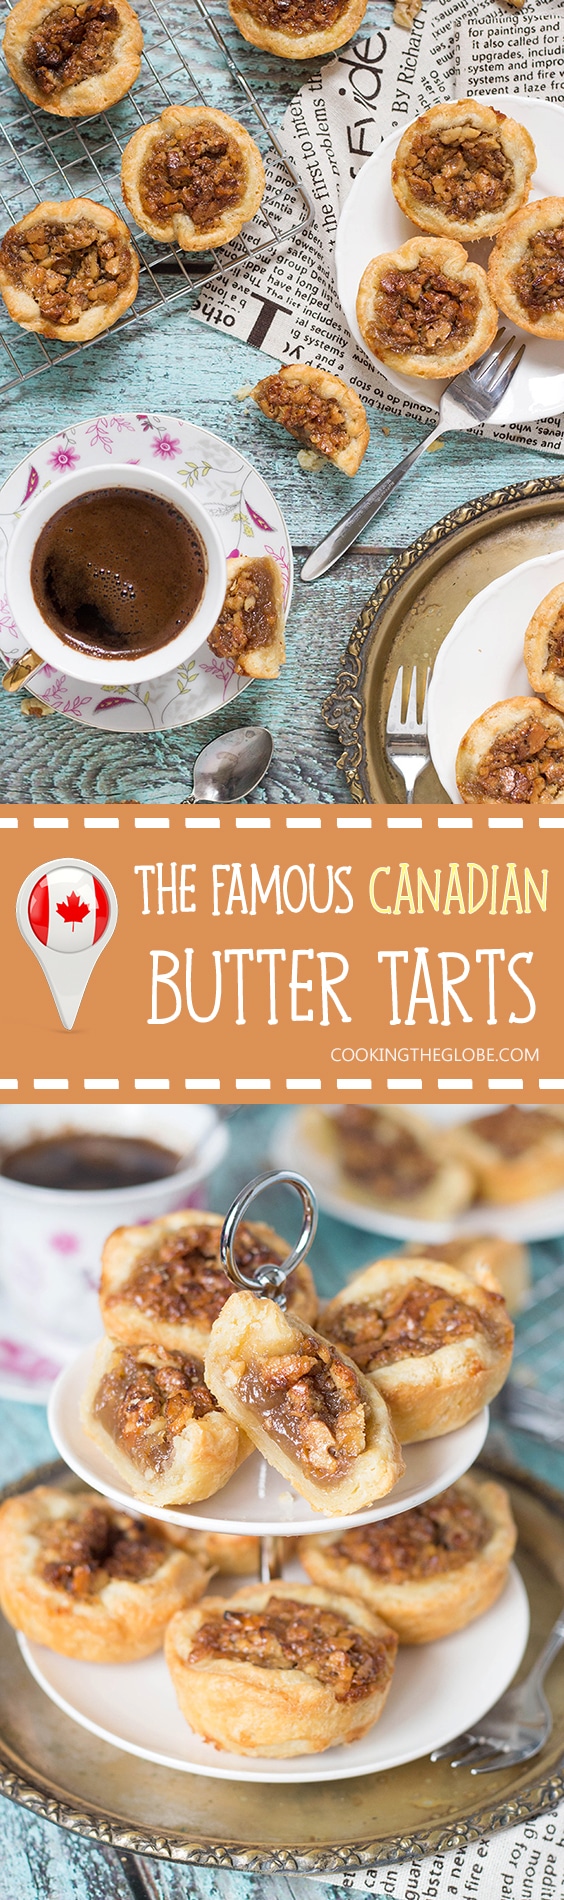 Butter Tarts are the traditional Canadian dessert. These little cute treats are sweet and buttery. One of the best desserts I have ever tried! | cookingtheglobe.com